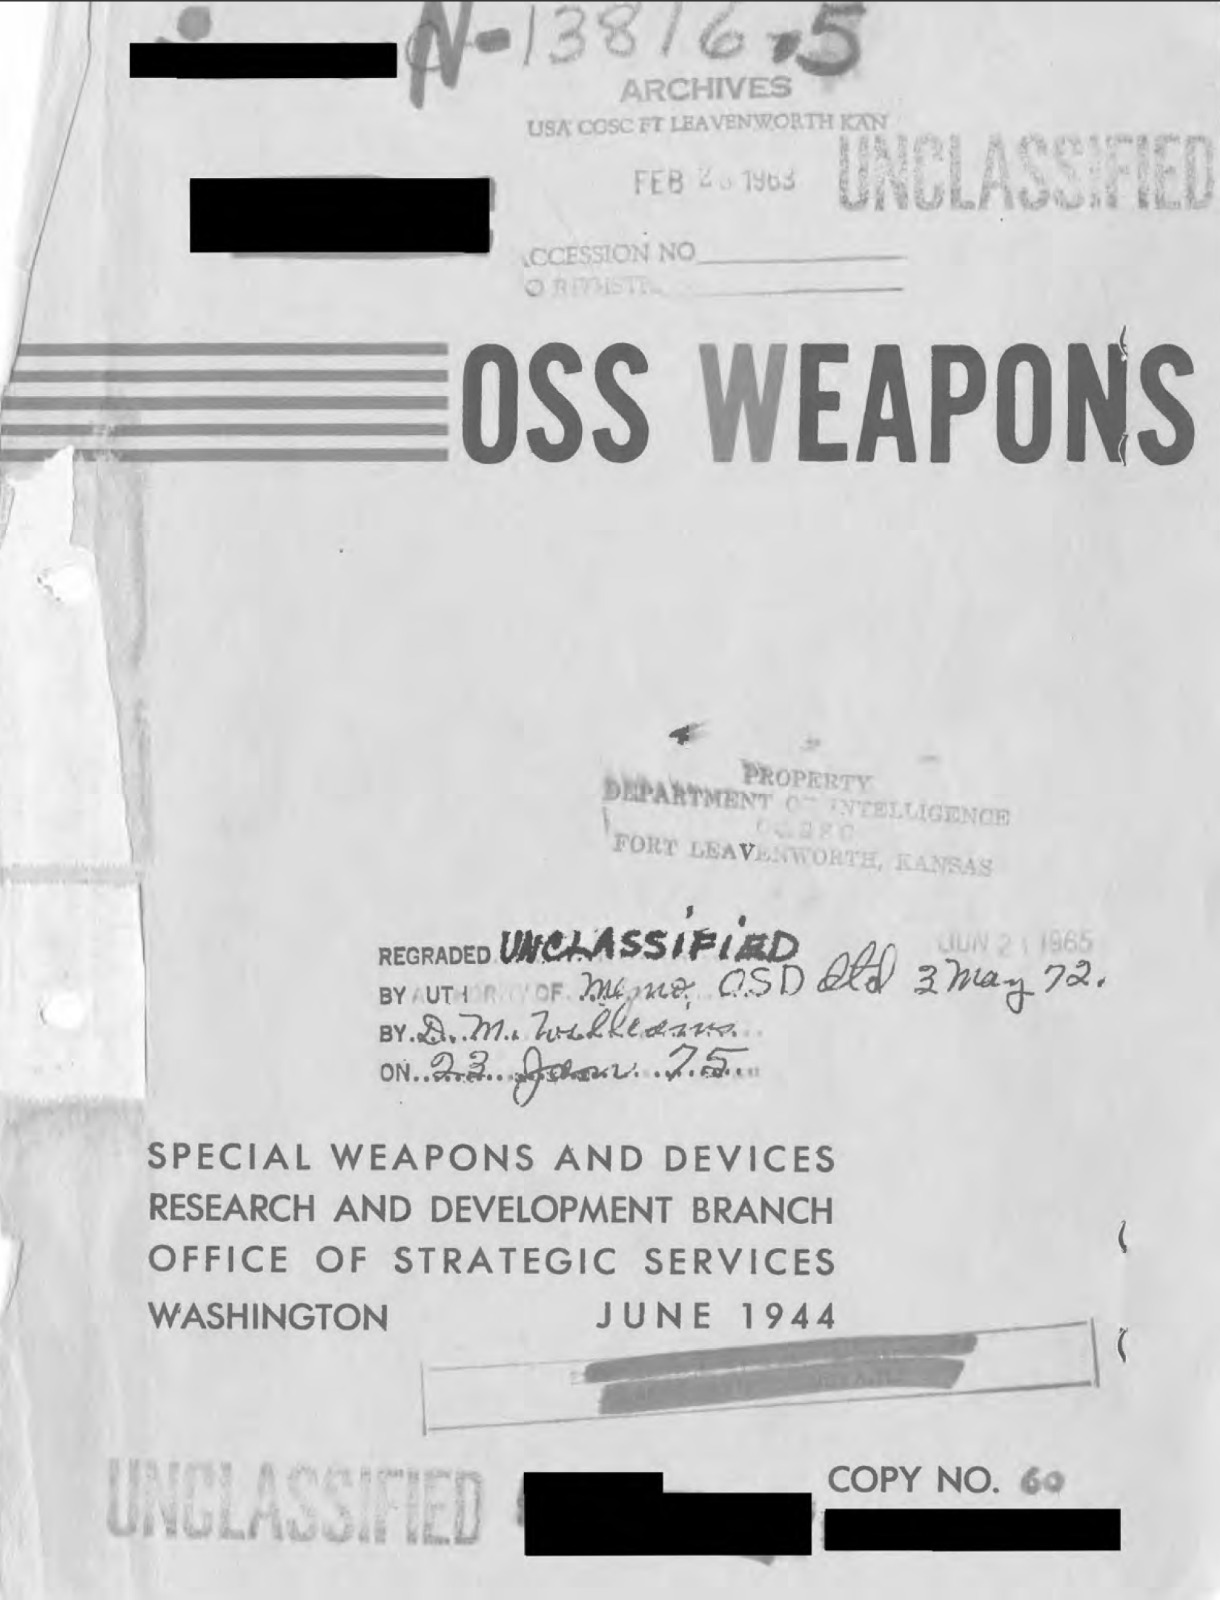 111 Page 1944 WWII OSS Office of Strategic Services Weapons Book on Data CD